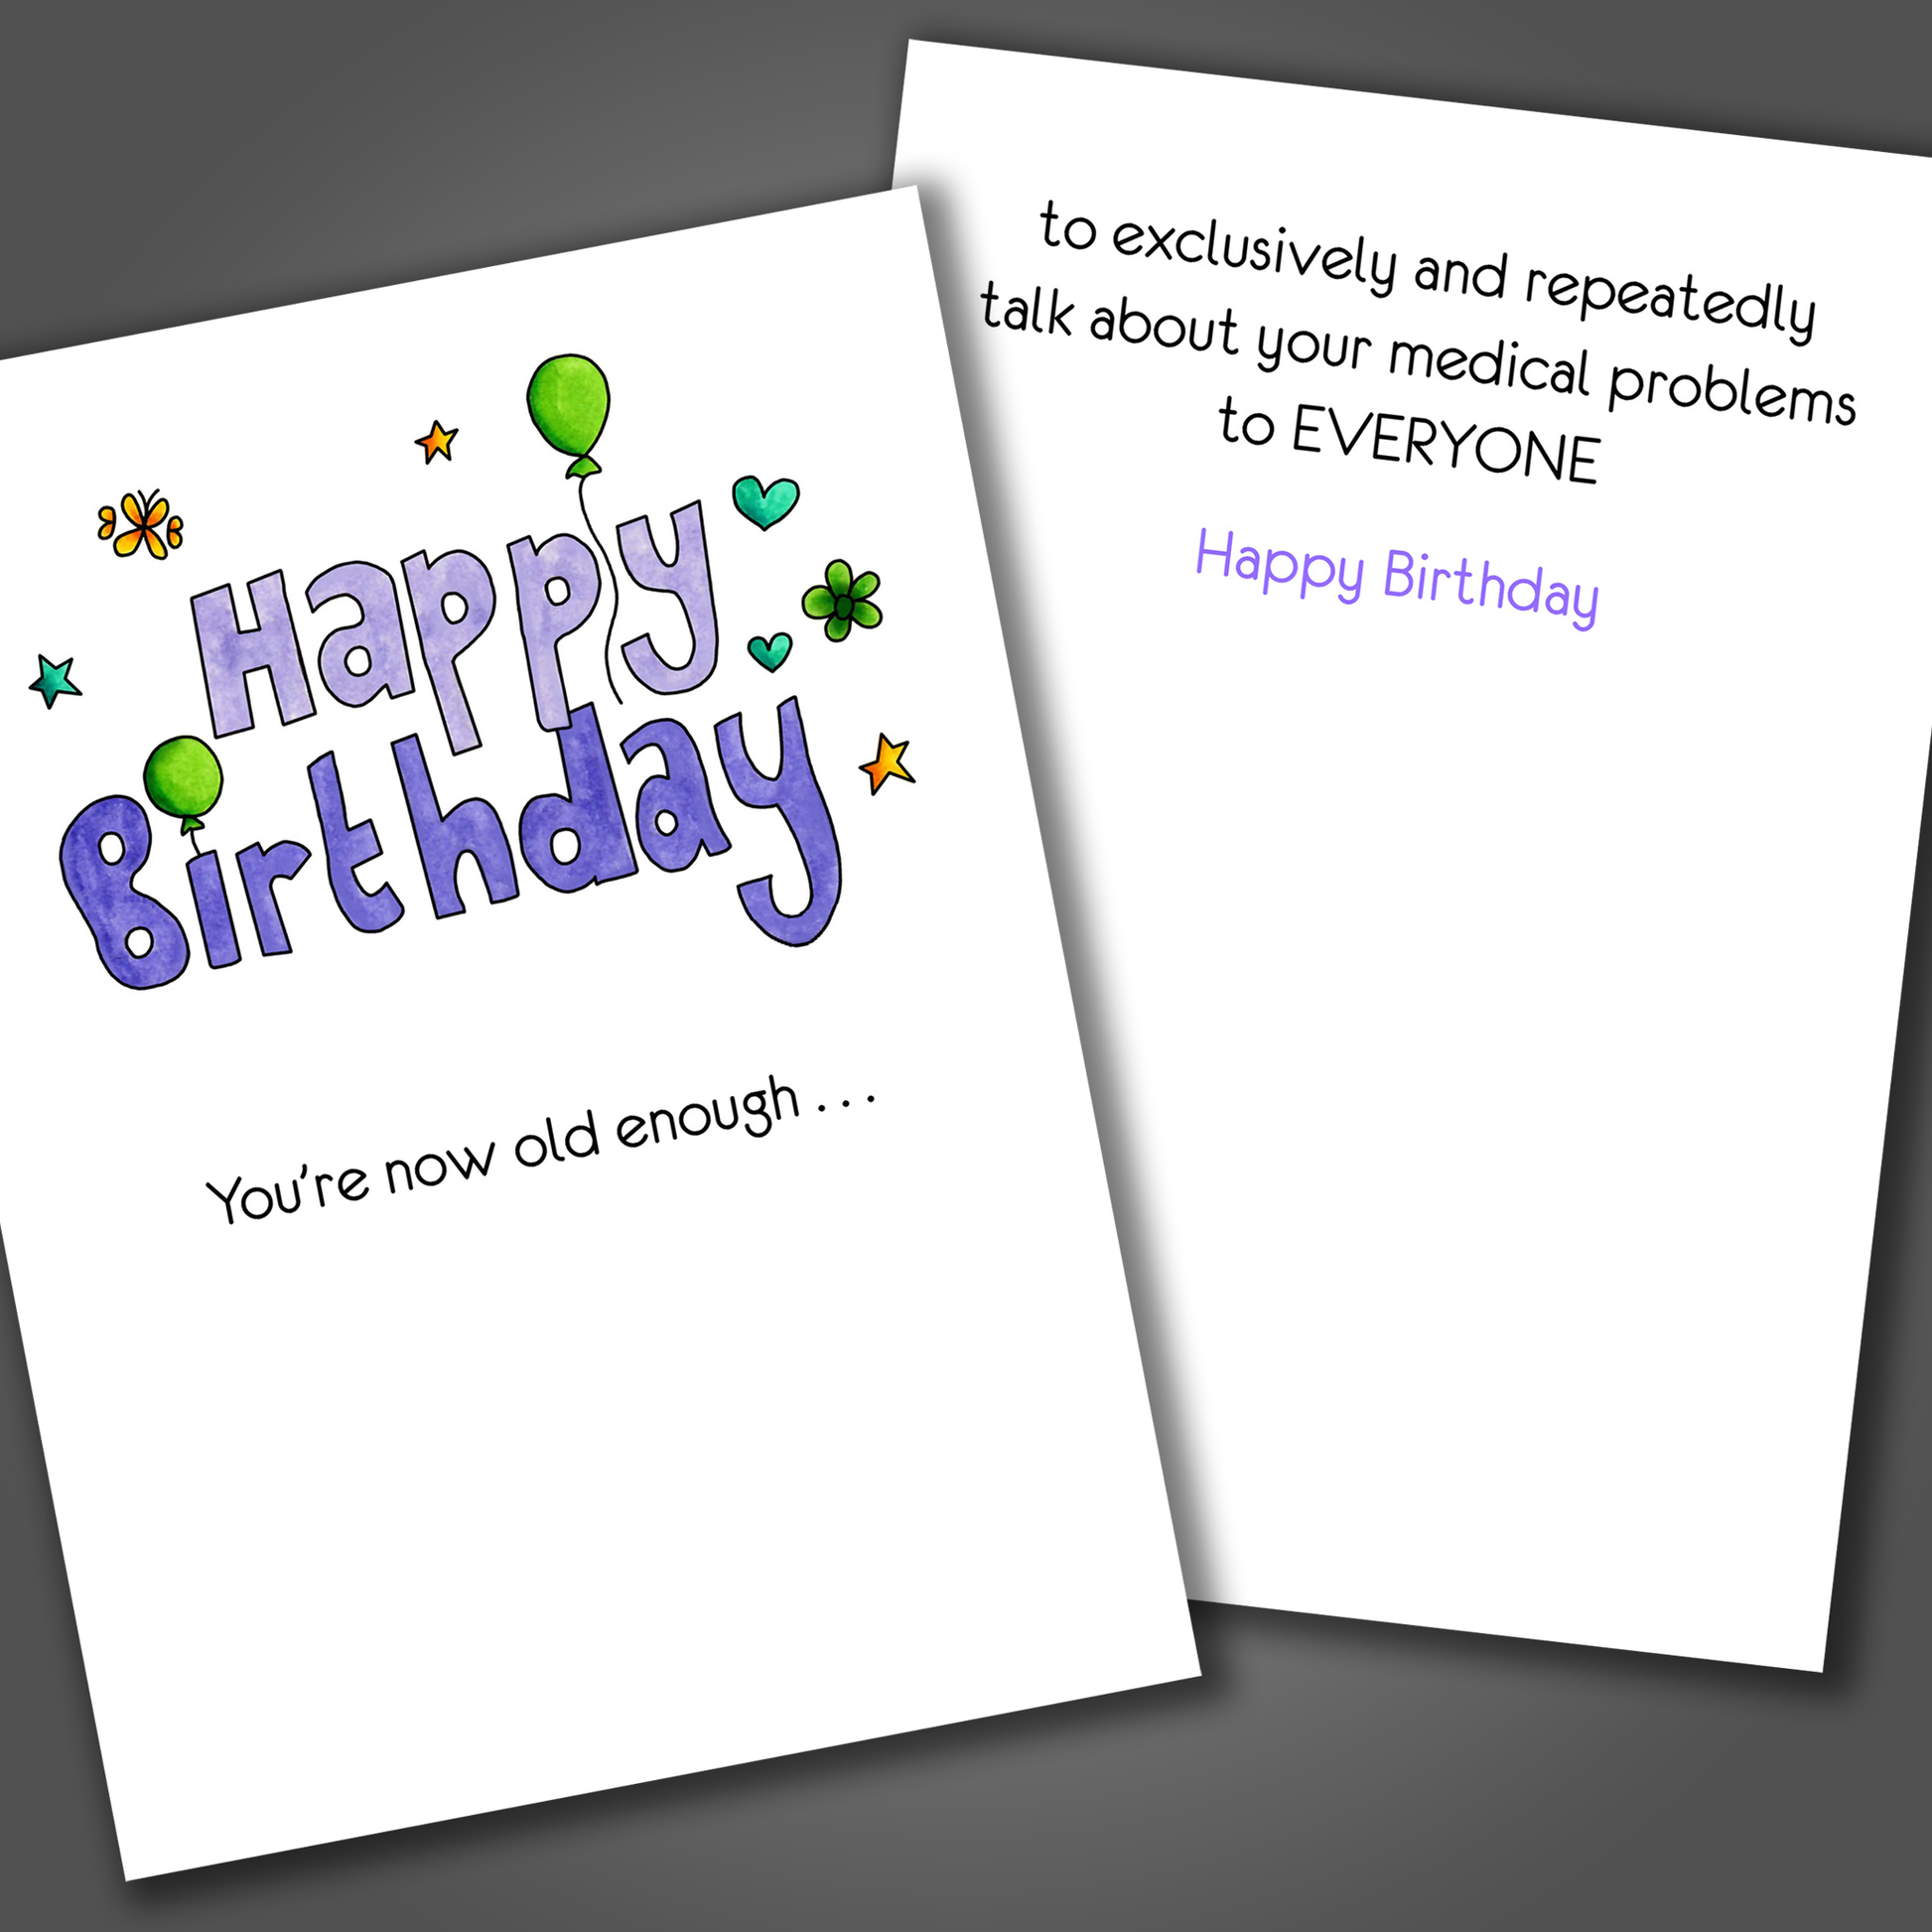 Funny happy birthday card with the words happy birthday drawn in purple on the front of the card. Inside the card is a funny joke making fun of the person for all their future medical problems!